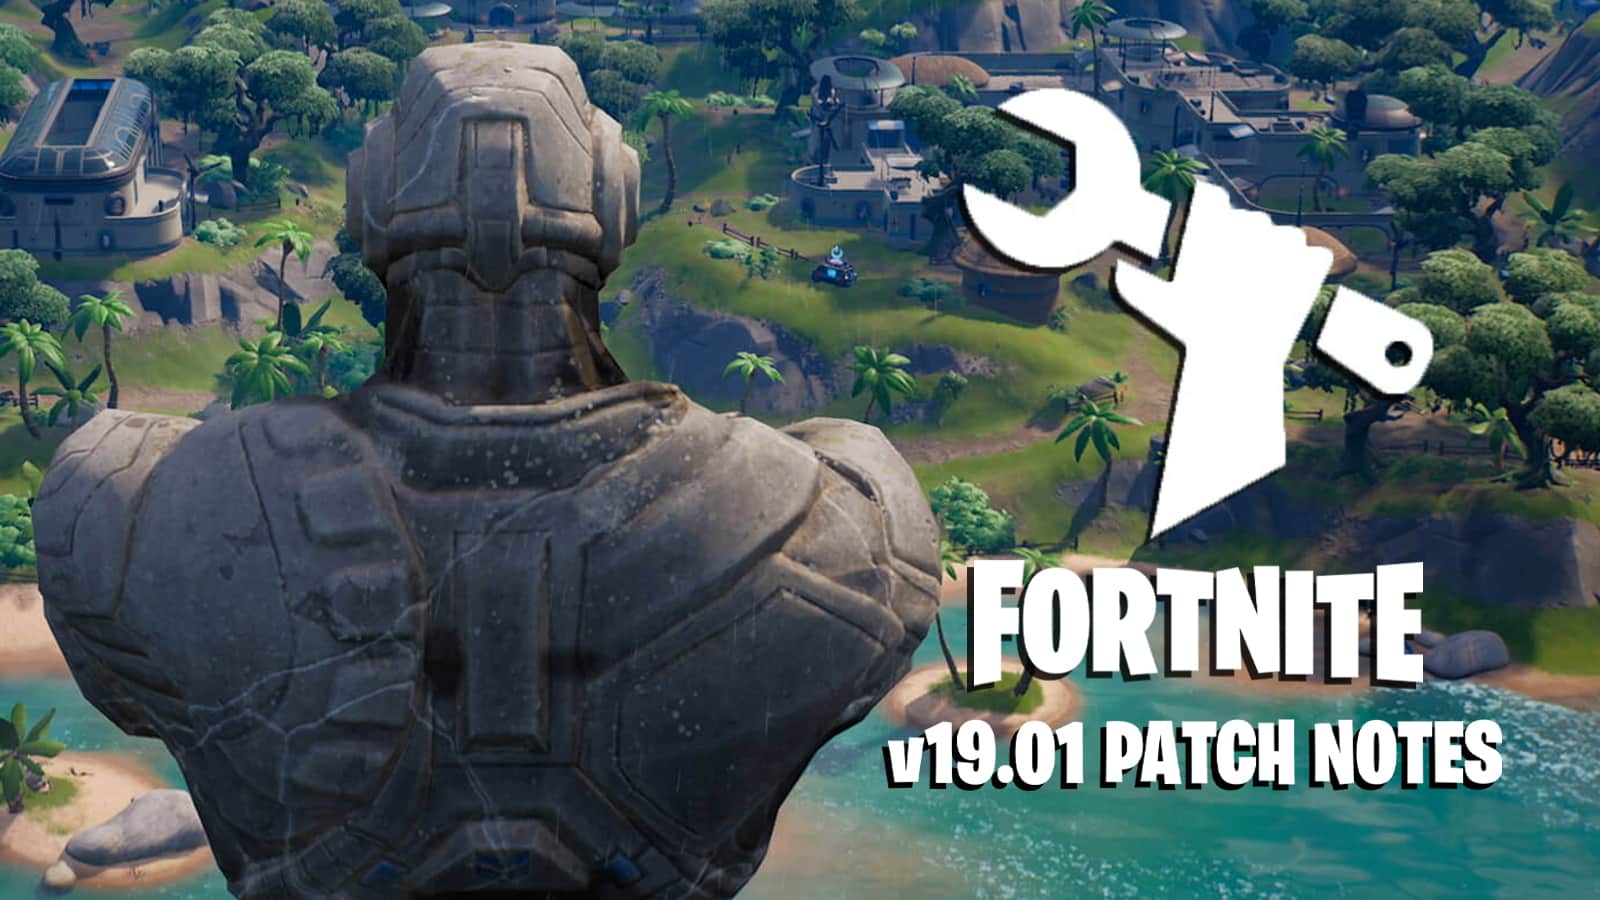 Fortnite 19.01 patch notes update logo next to the Island map